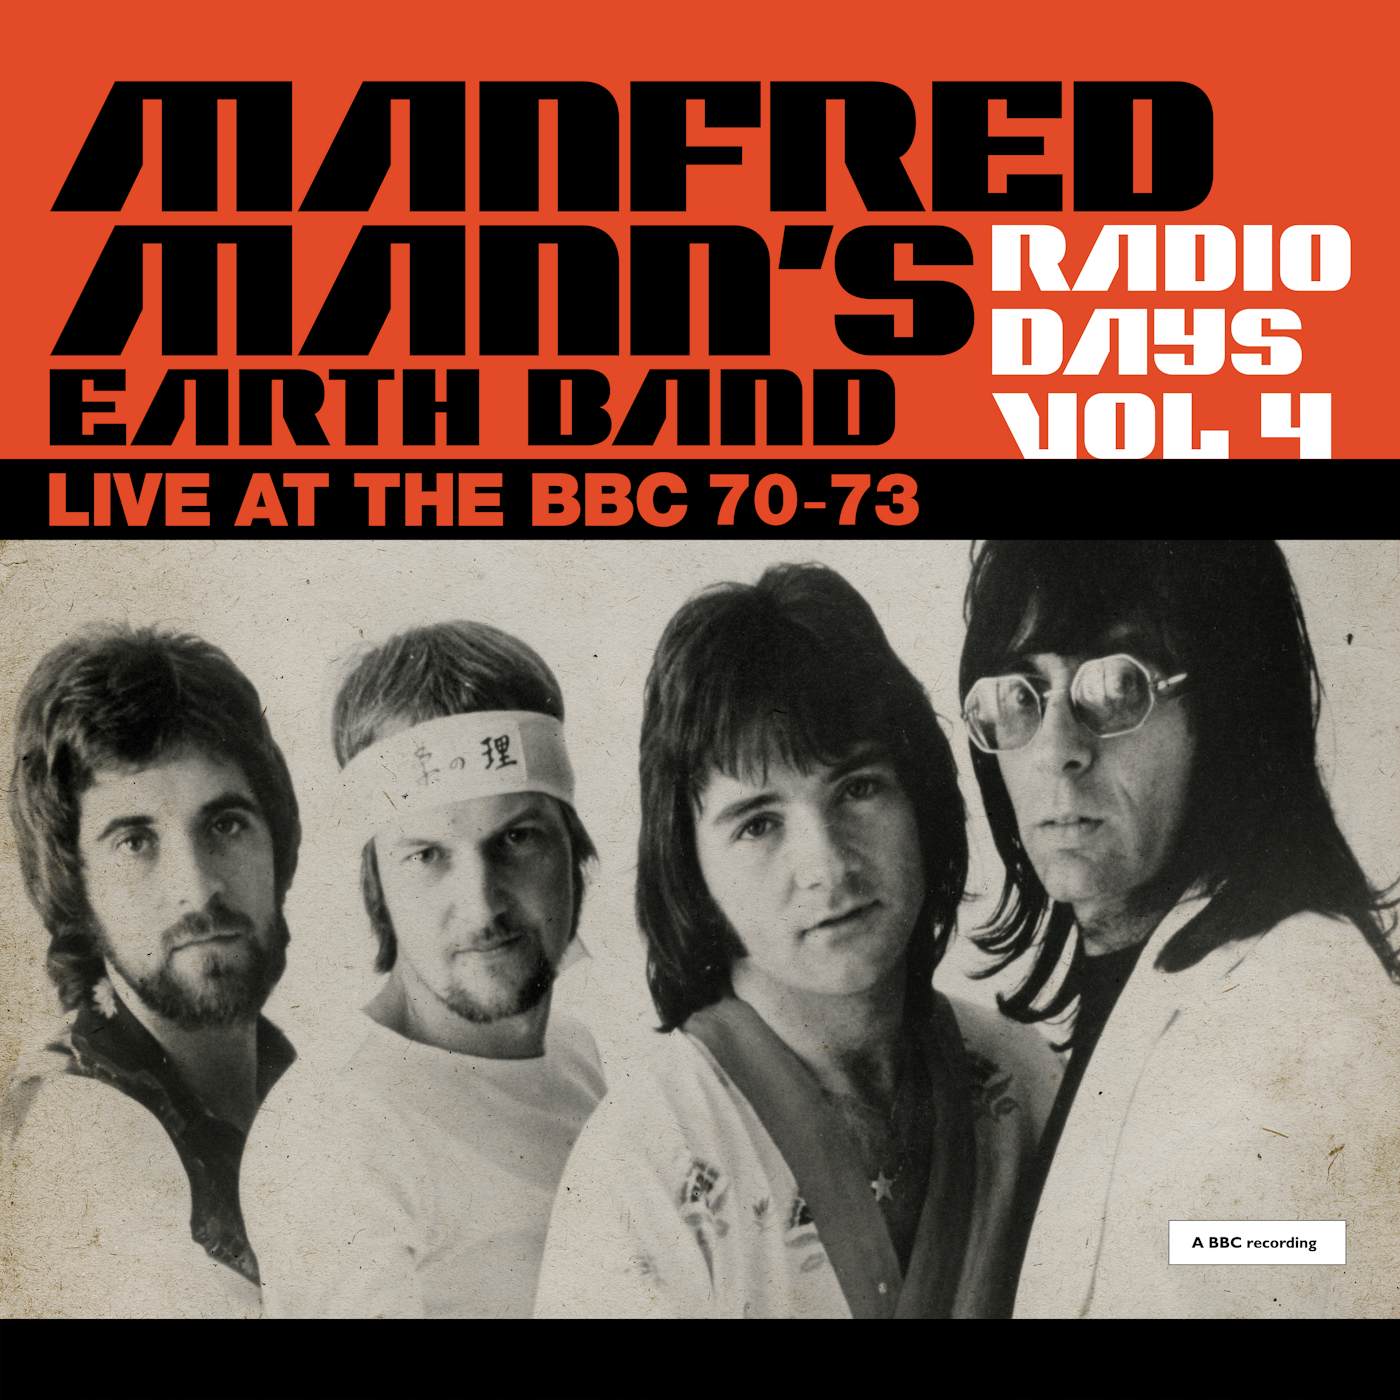 Manfred Mann's Earth Band RADIO DAYS VOL. 4: LIVE AT THE BBC 1970-73 Vinyl Record